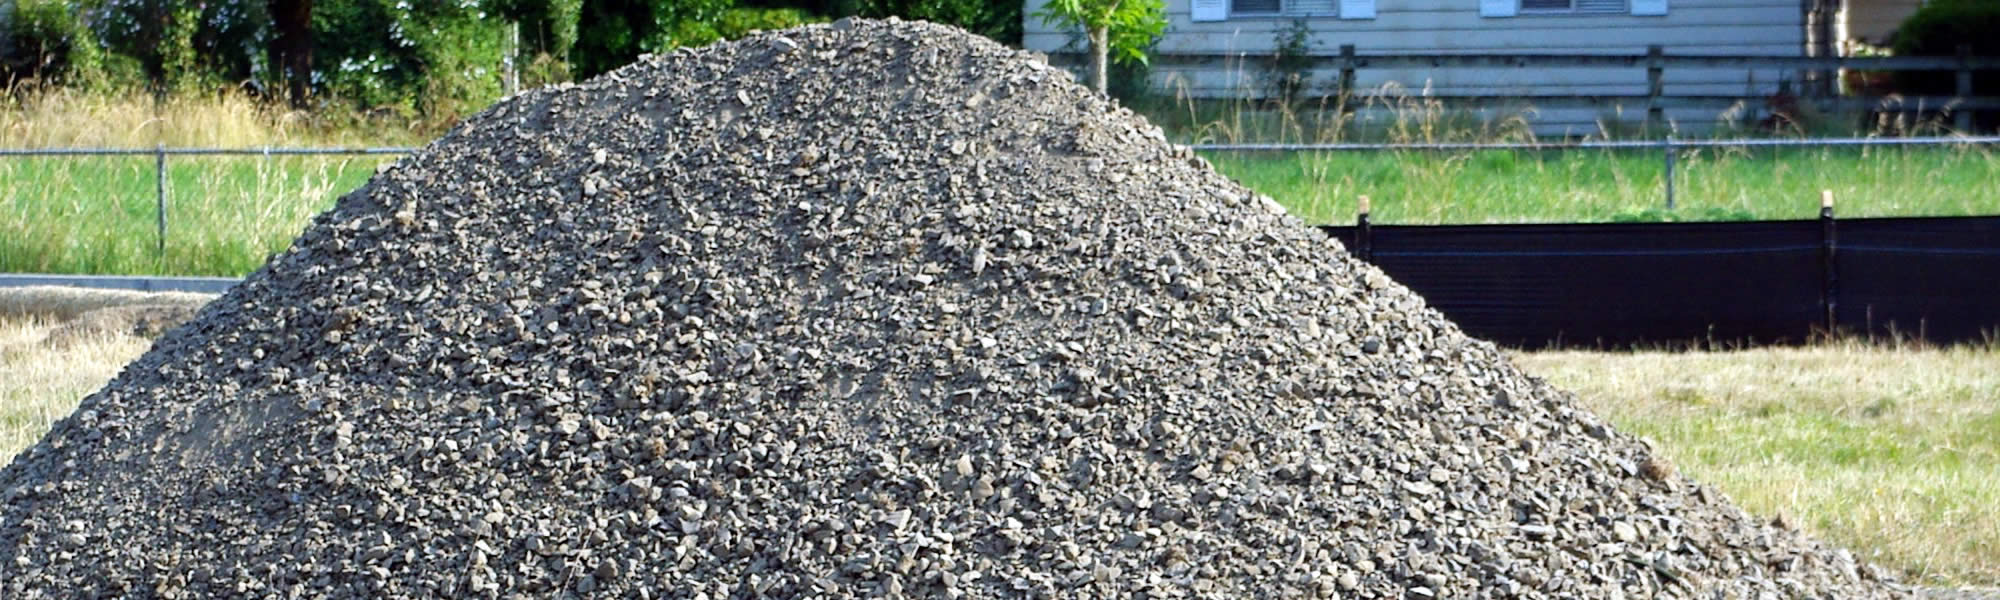 Hobart Gravel and Dirt Delivery Services near me